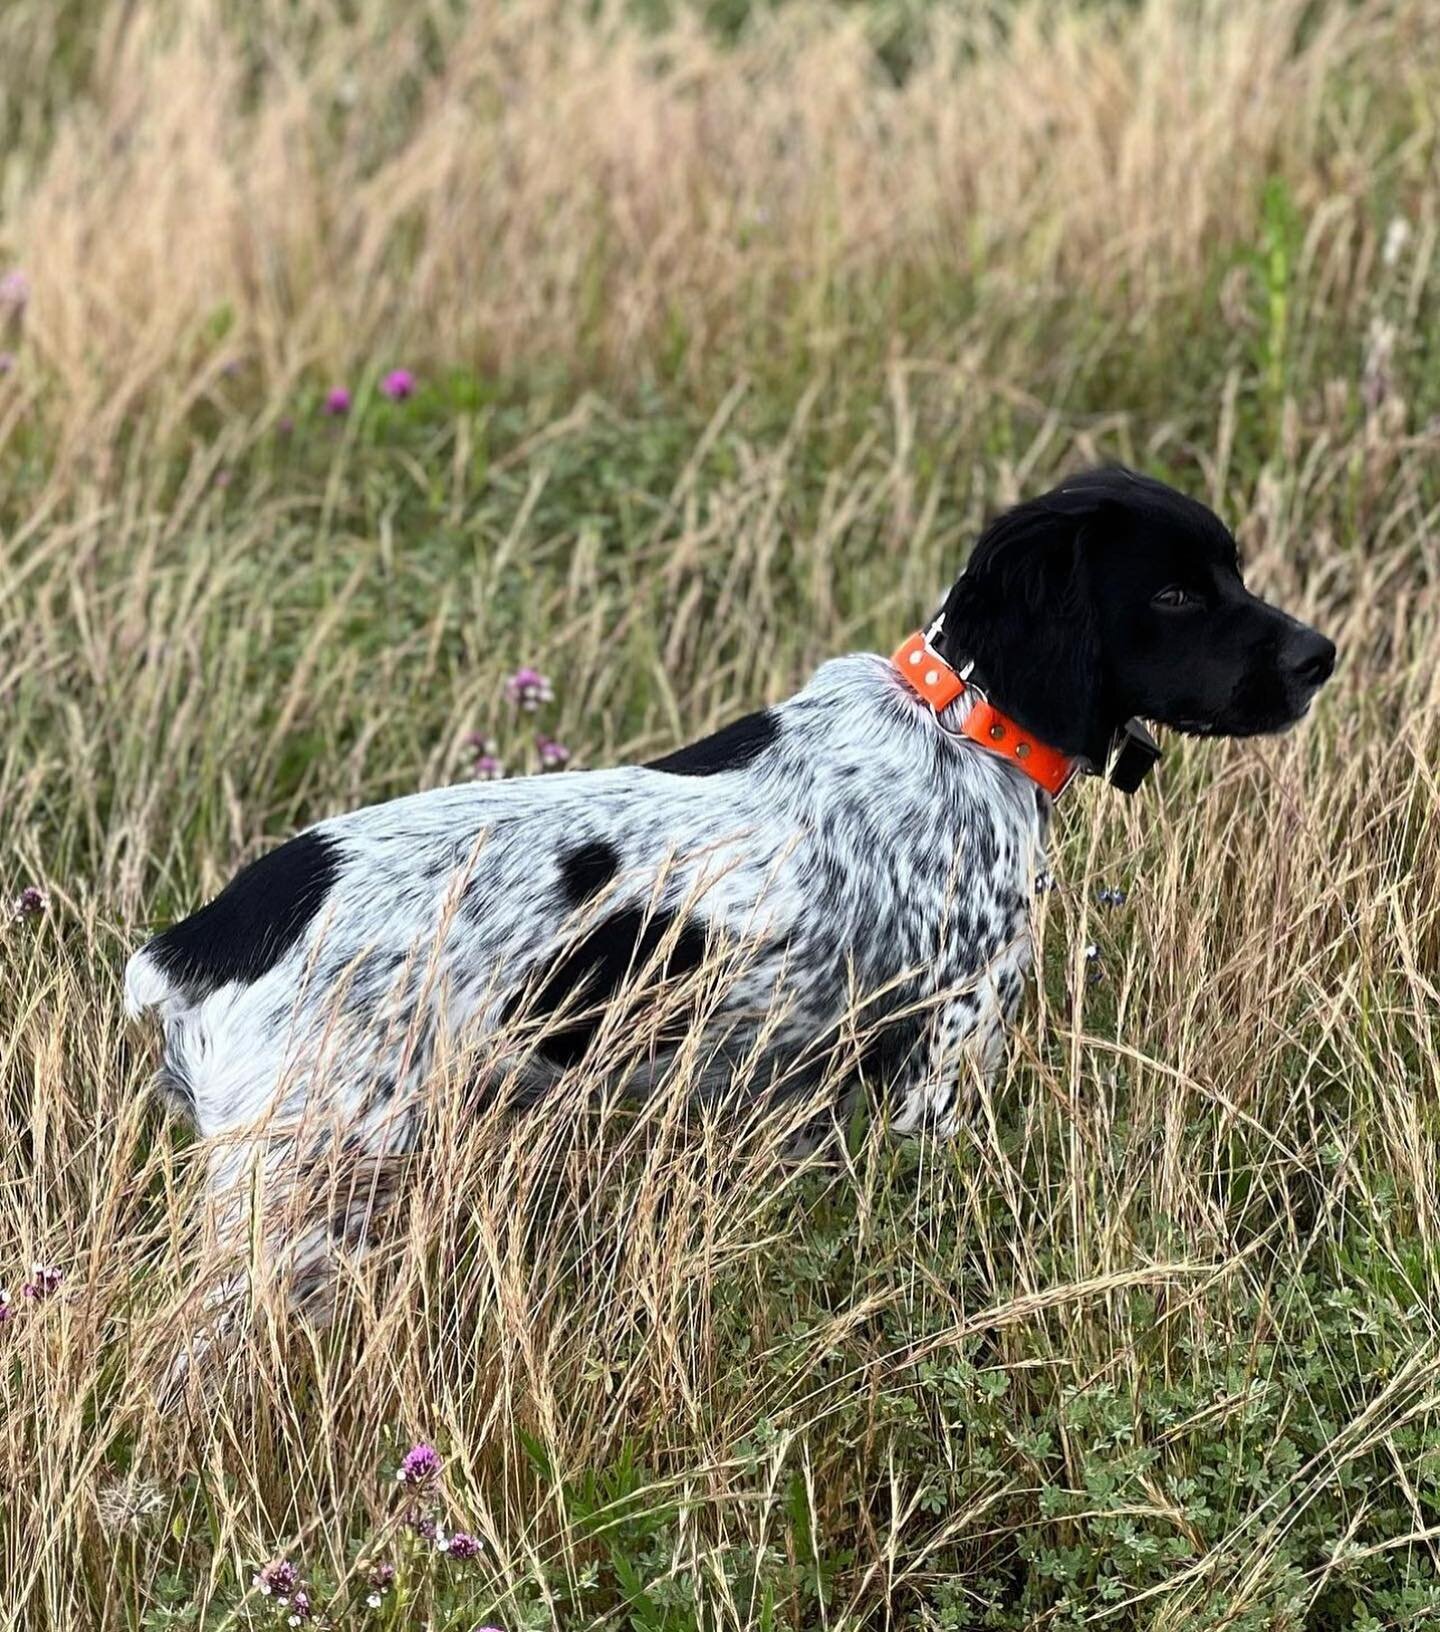 Welcoming another new member to the club. Shae de CaliBreton. 

Our southern CA membership is really growing. Can&rsquo;t wait to chase California quail with them this Fall. 

#swbretons #epagneulbreton #frenchbrittany #birddog #birddogoftheday #upla